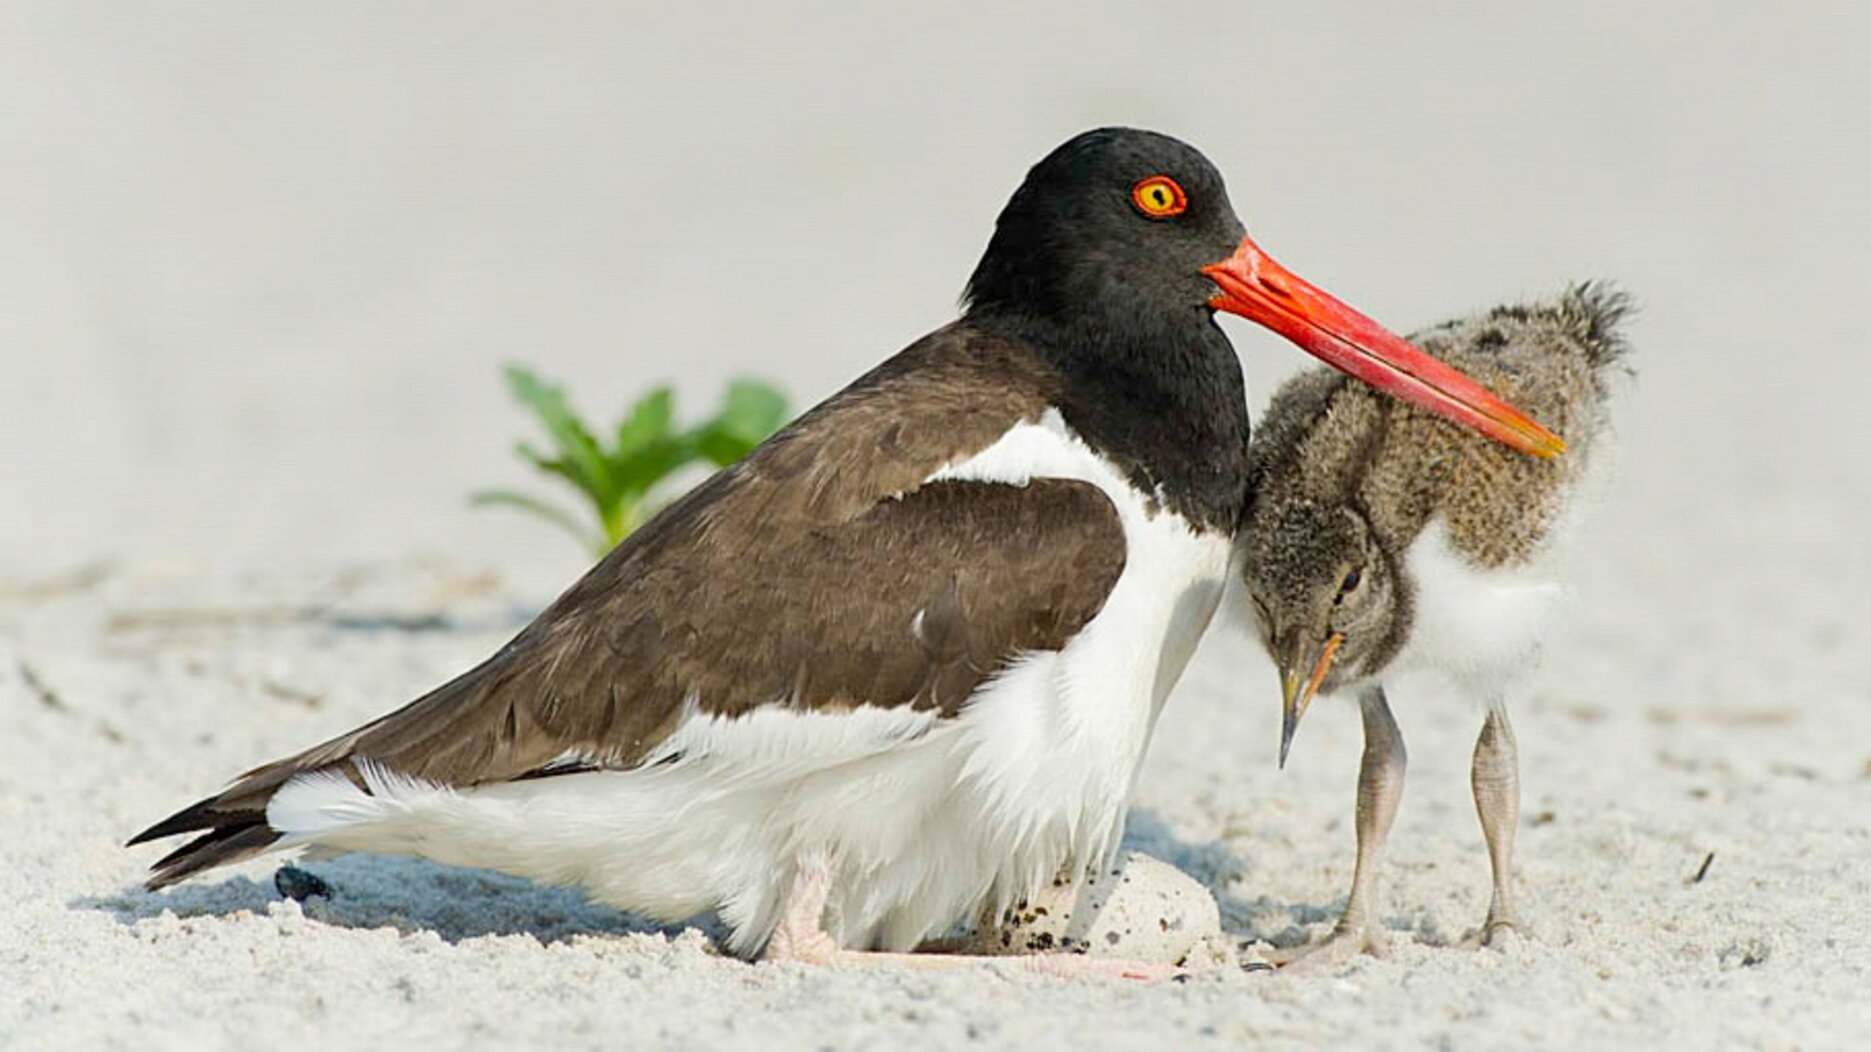 American Oystercatcher chicks can run within 24 hours of hatching, but it takes up to 60 days for their beaks to become strong enough to pry open bivalves. Photo: Christopher Ciccone/Audubon Photography Awards